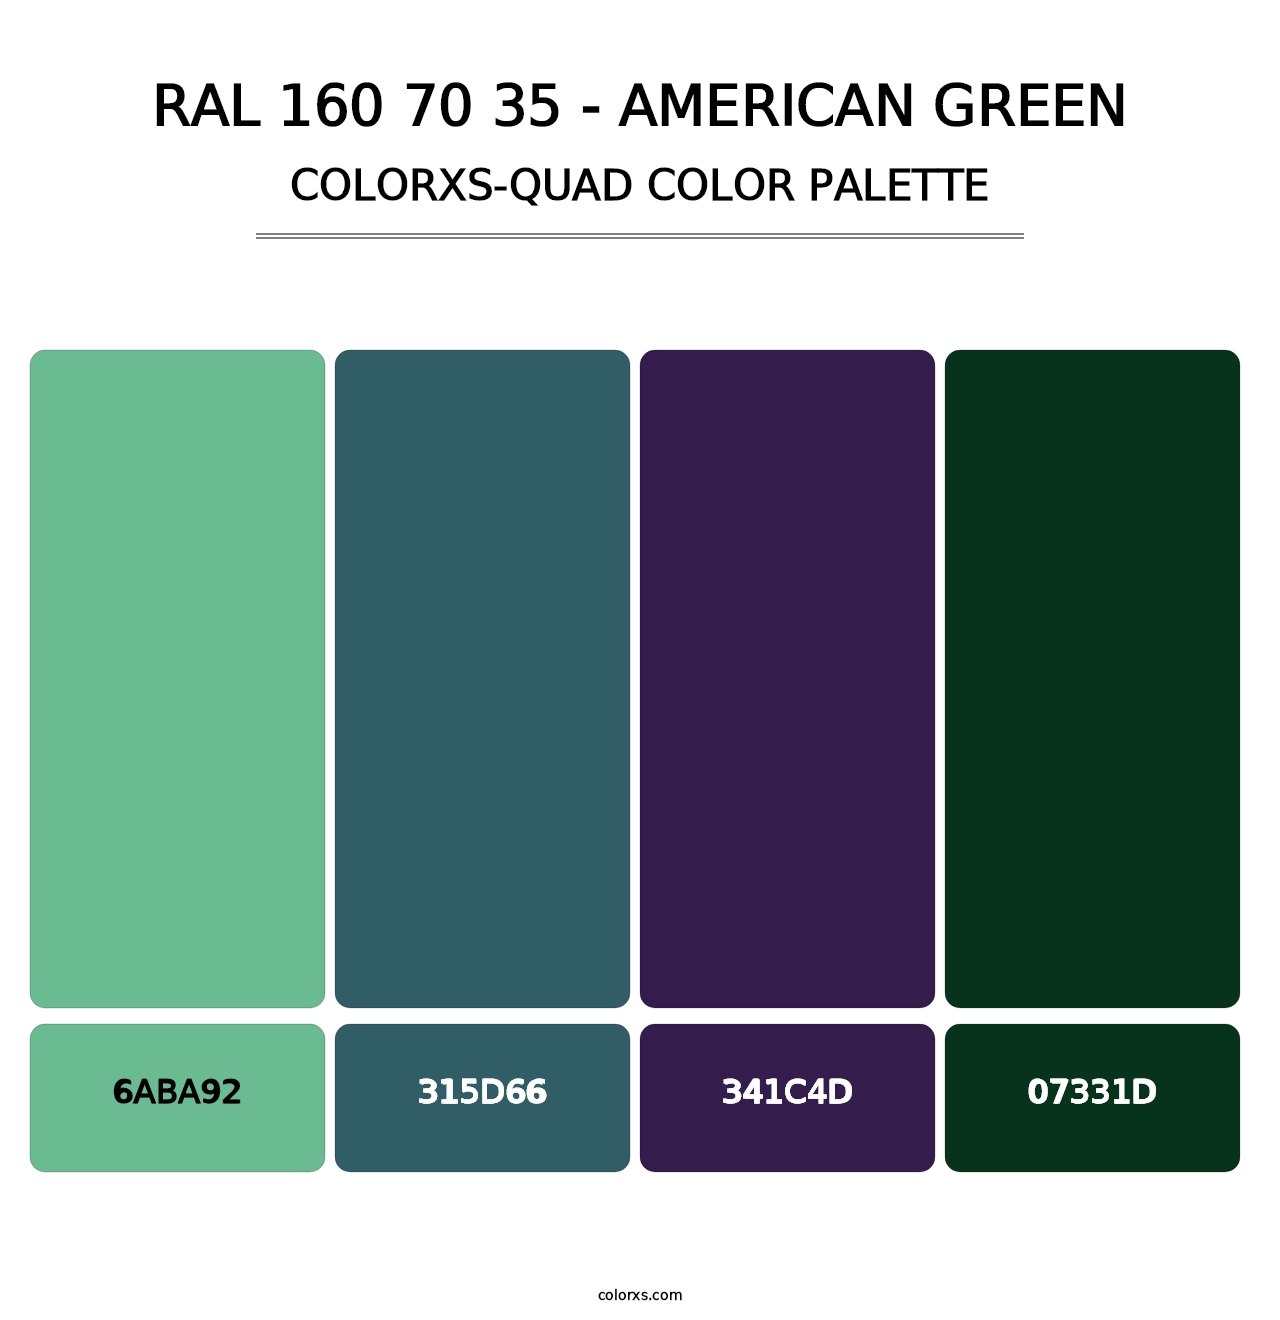 RAL 160 70 35 - American Green - Colorxs Quad Palette